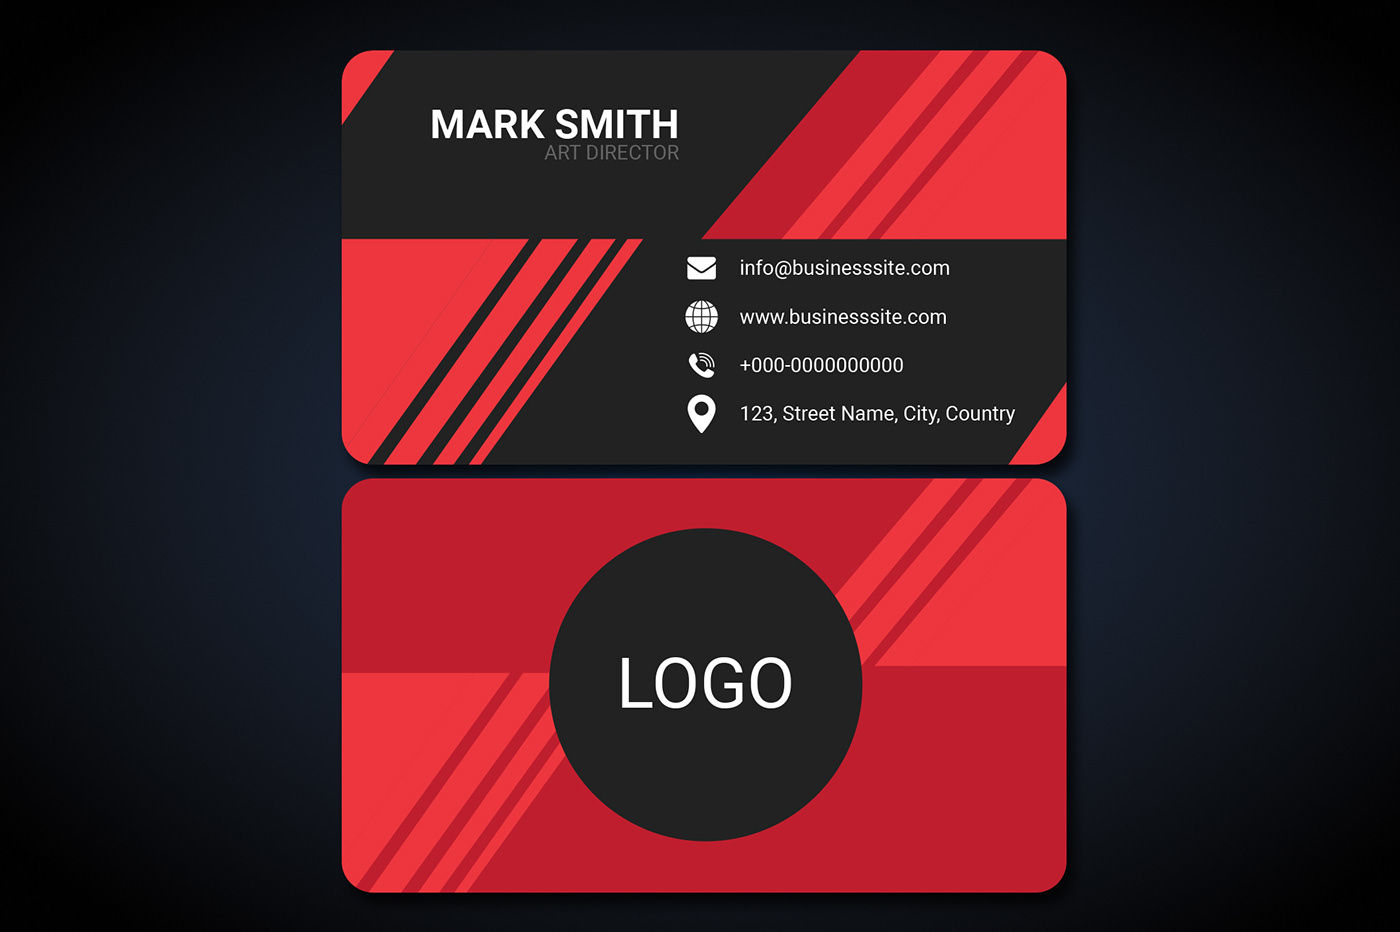 Download Business Card Mockup PSD file | Free Download on Behance